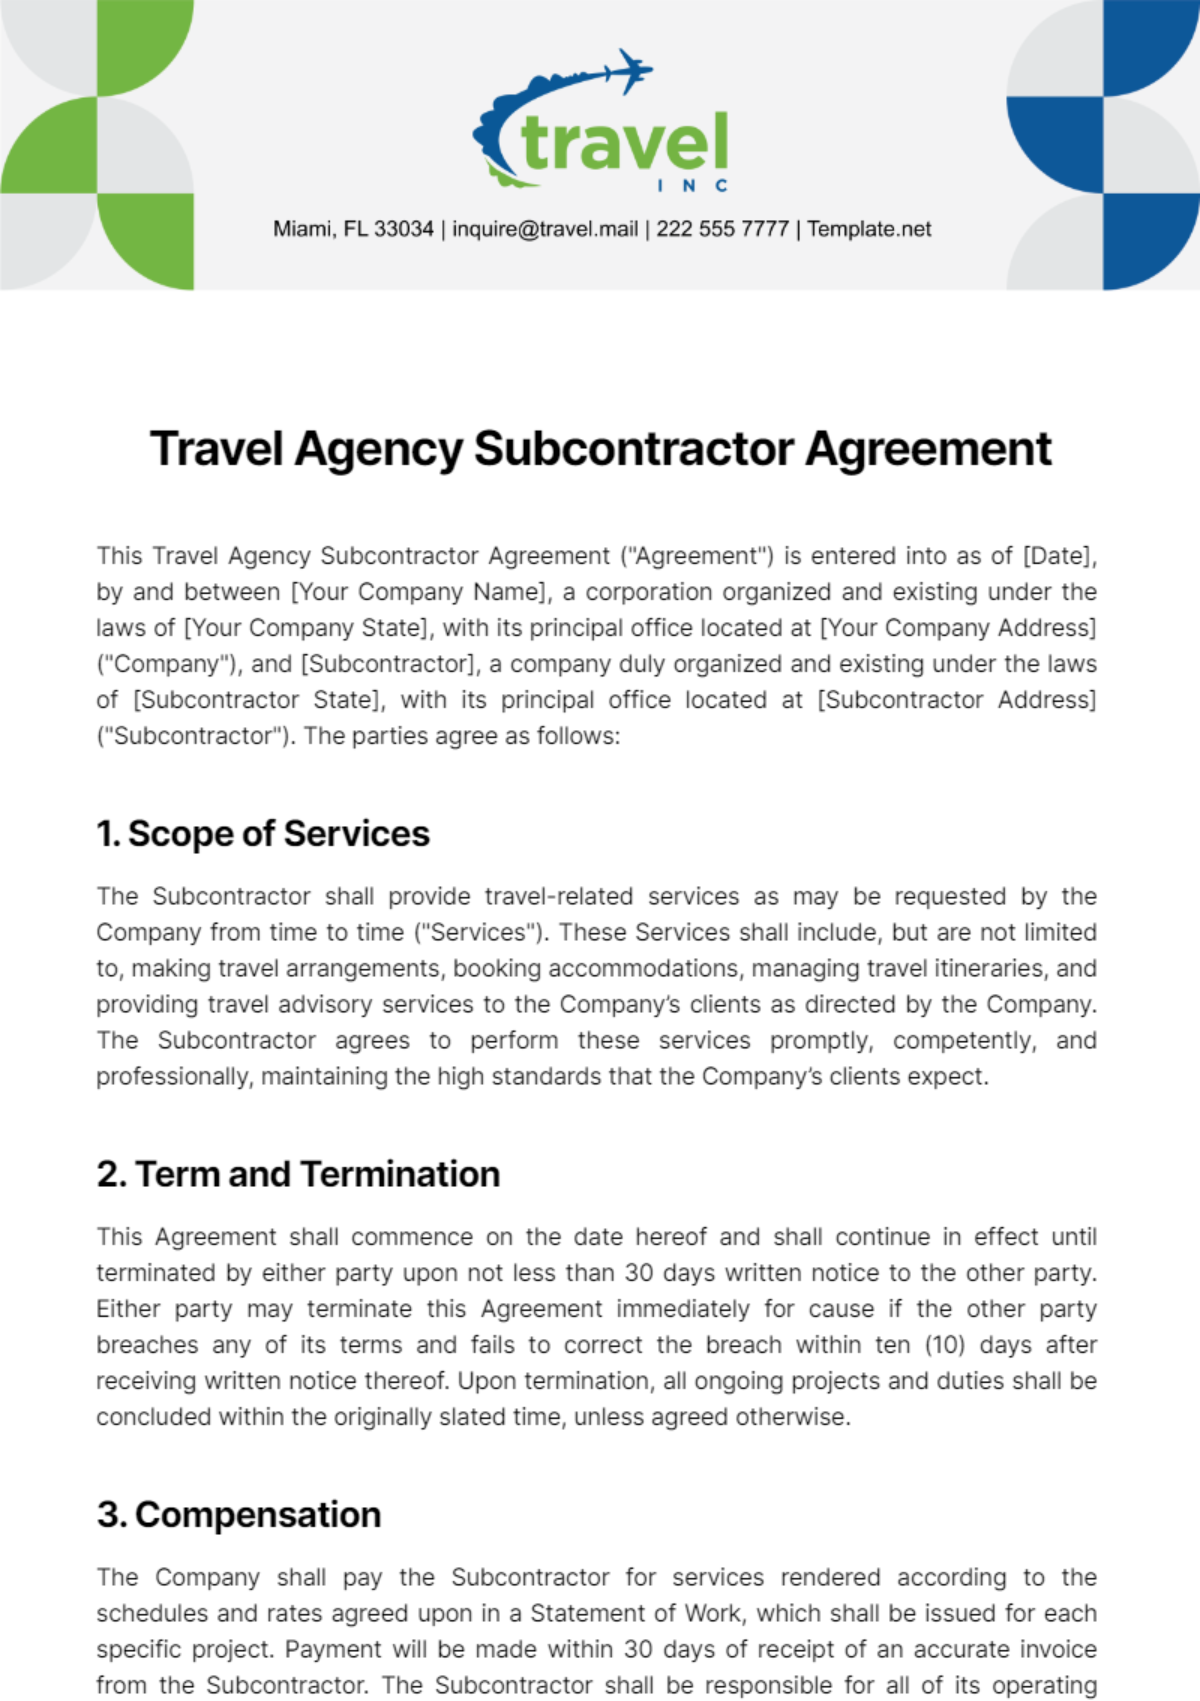 Travel Agency Subcontractor Agreement Template